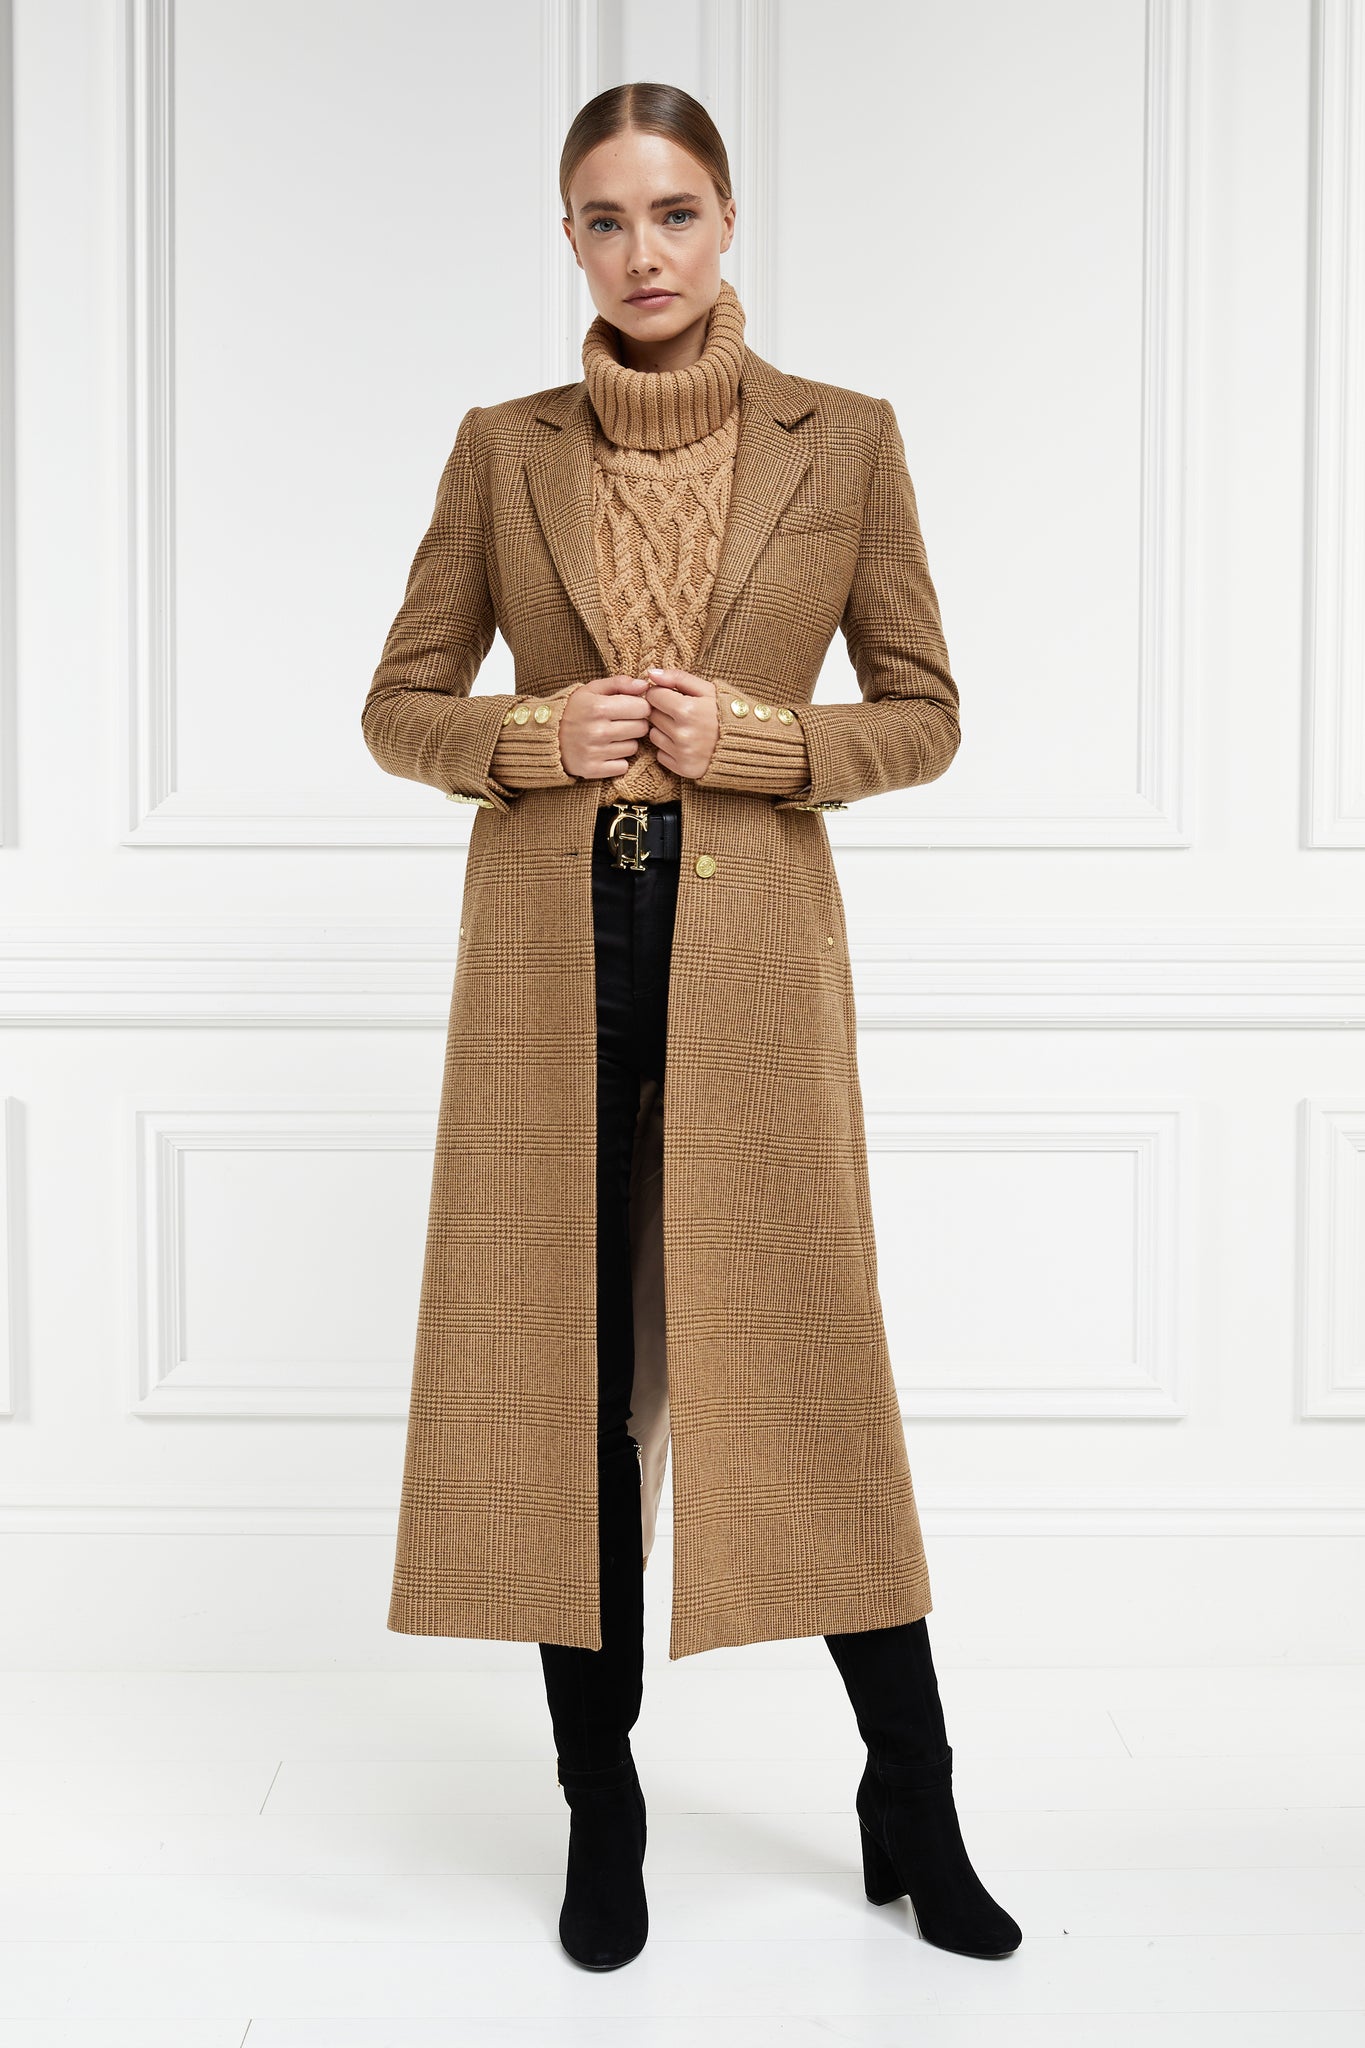  Fitted Coat